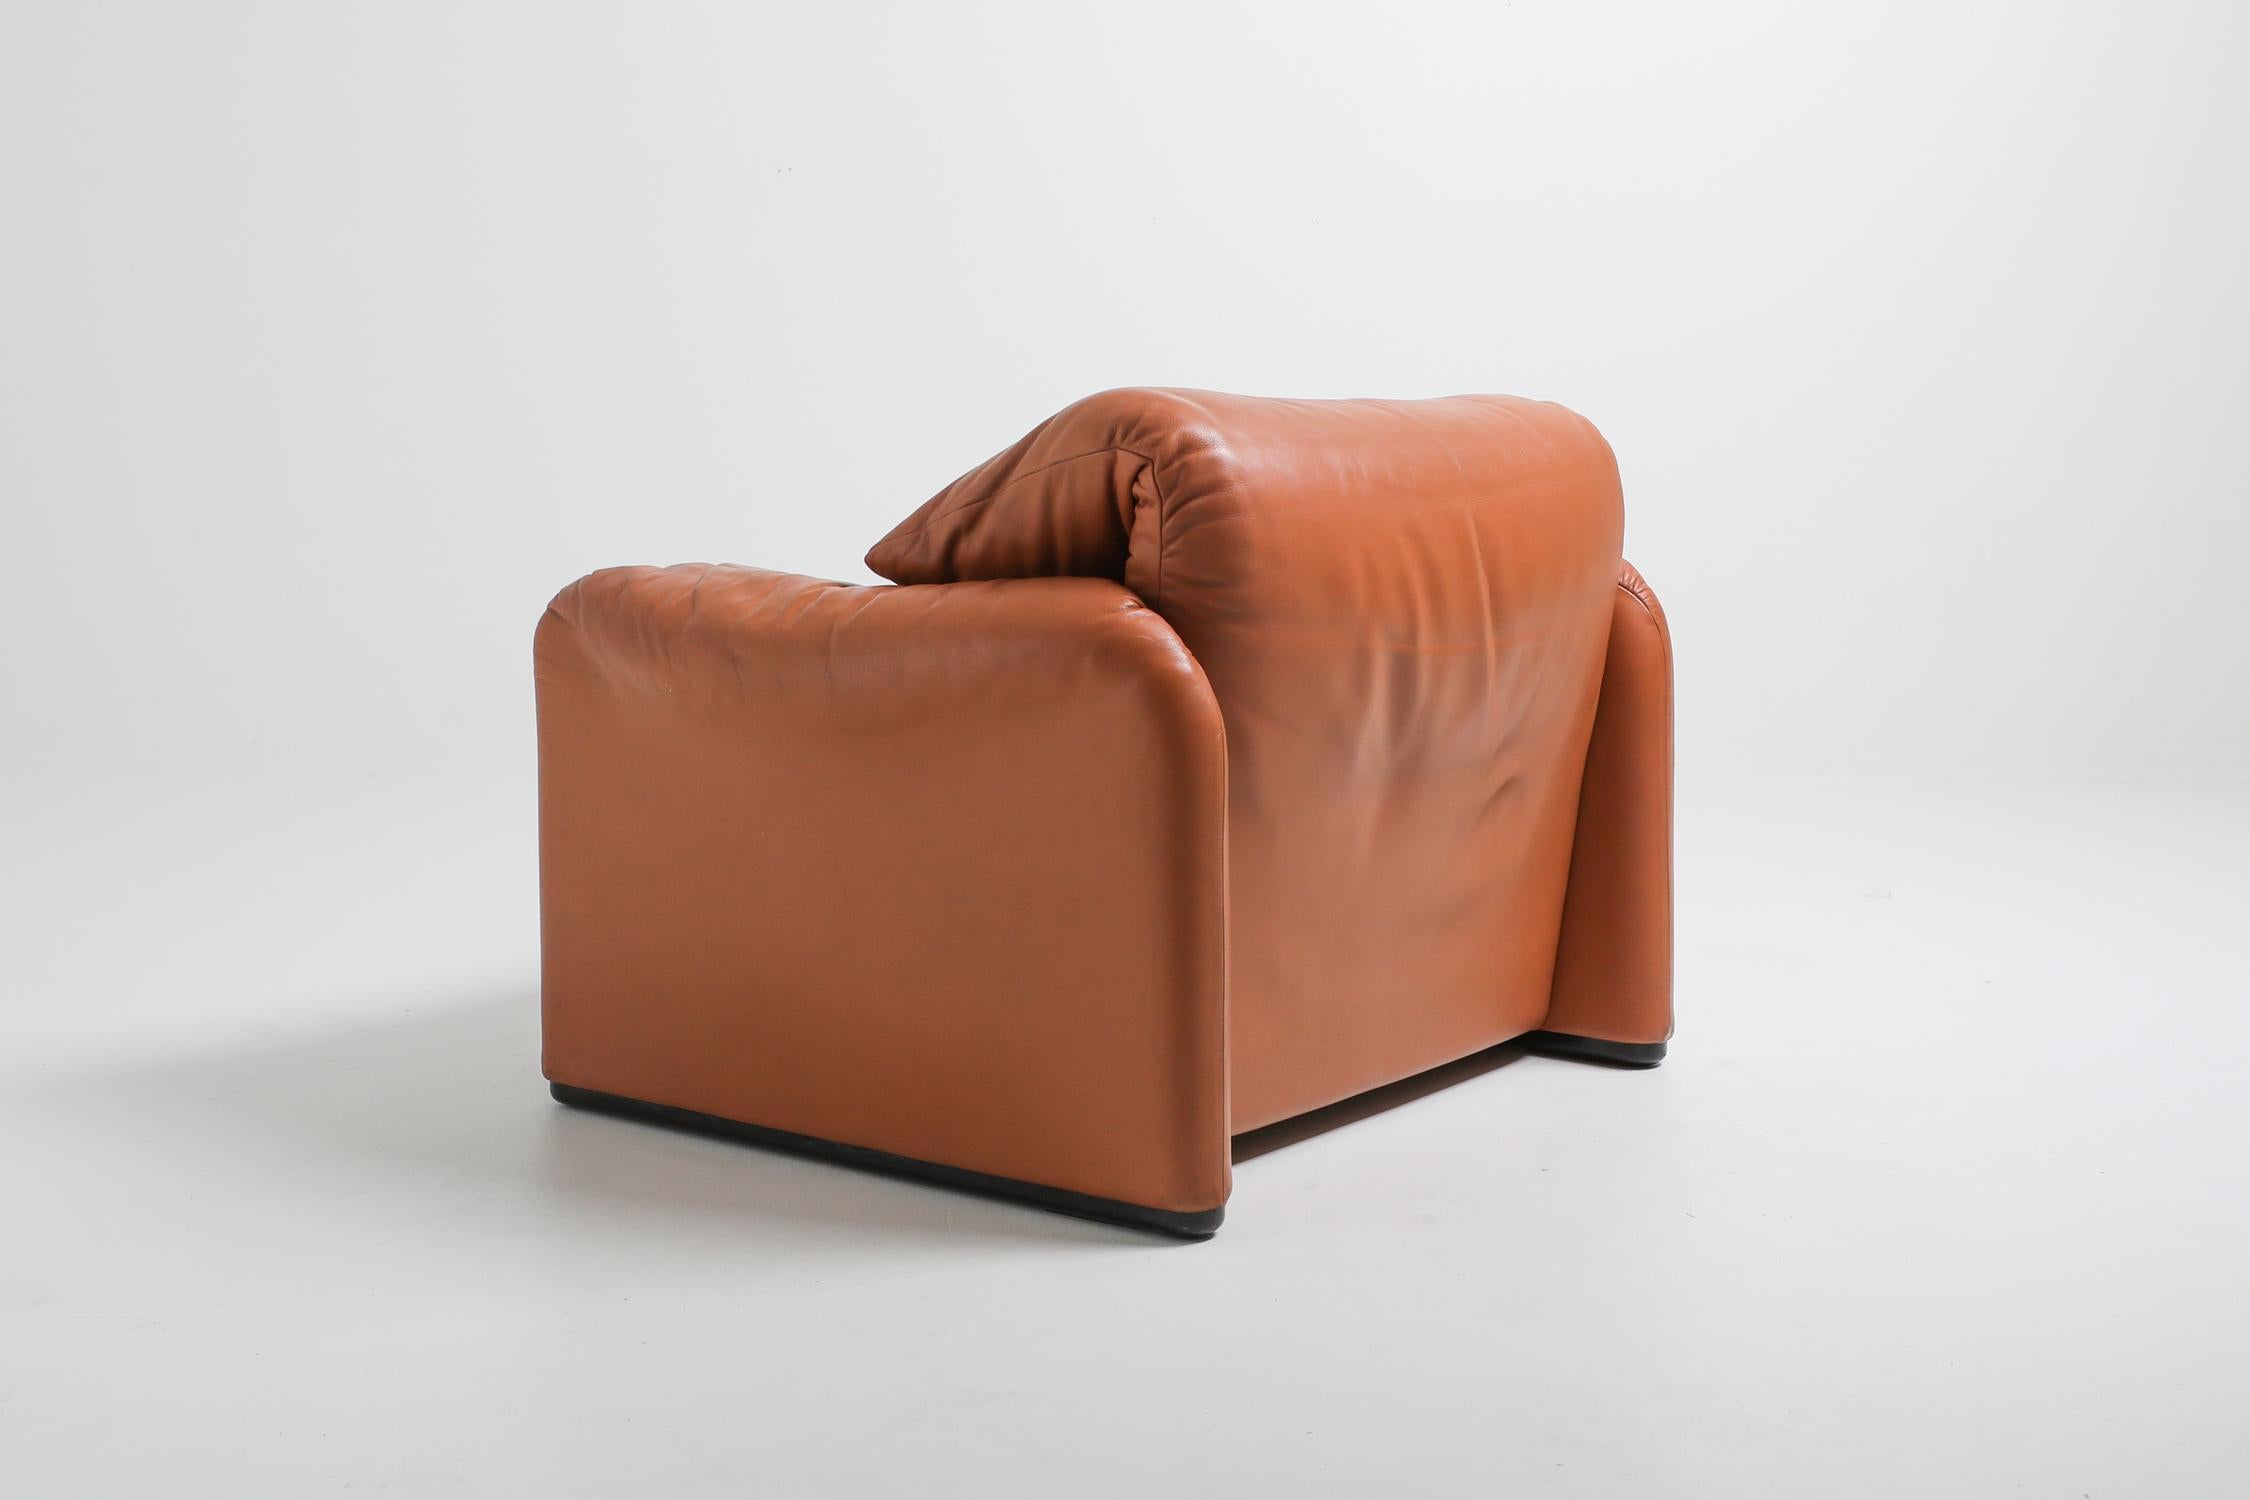 Maralunga Cognac Leather Club Chairs by Vico Magistretti for Cassina, 1974 4